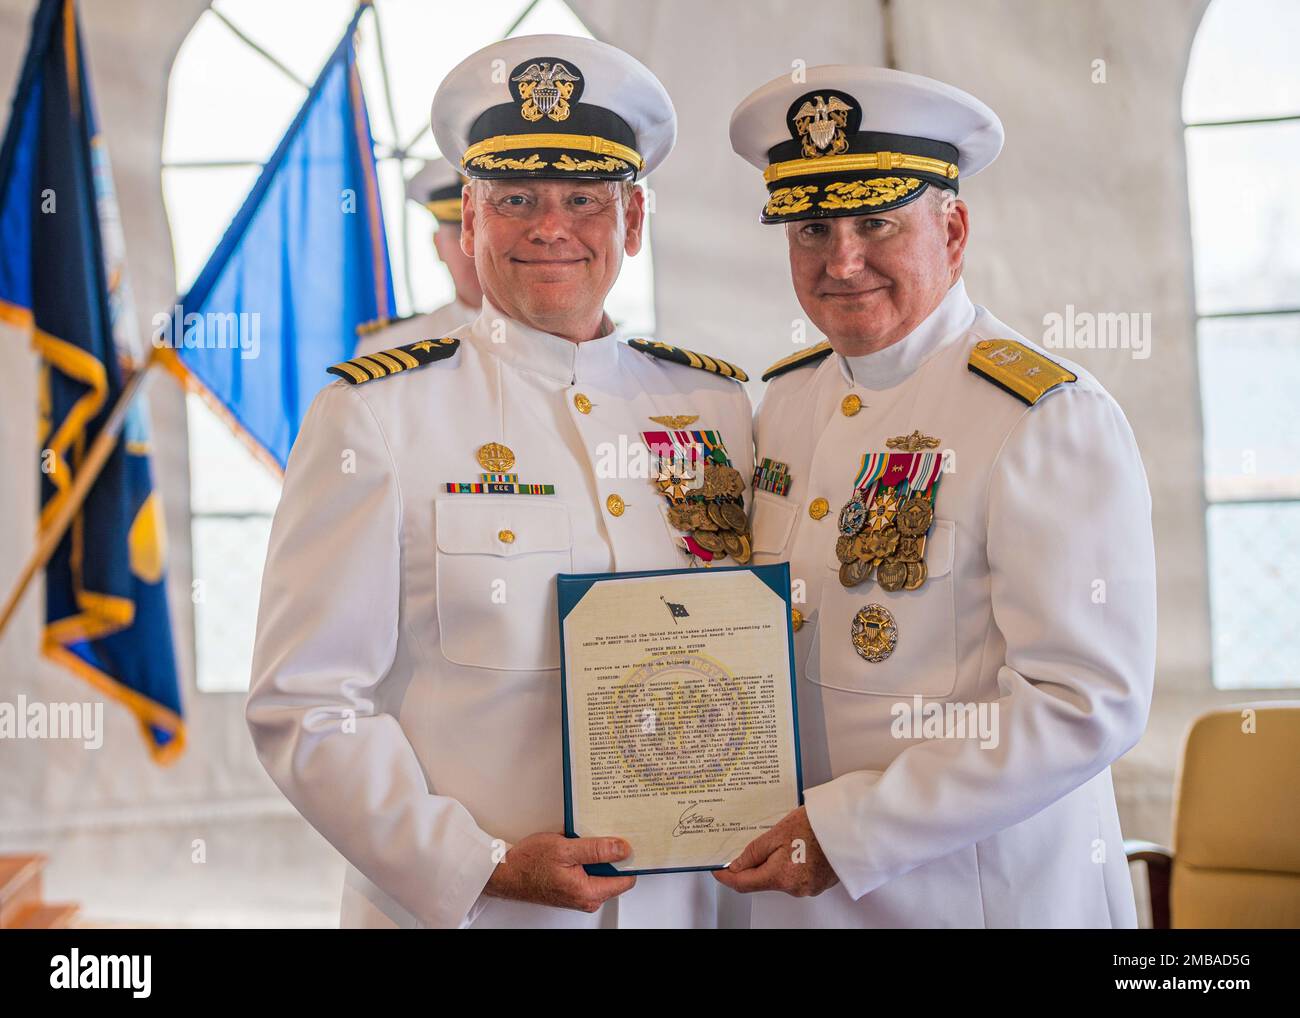 220614-N-KN989-1006 JOINT BASE PEARL HARBOR-HICKAM, Hawaii (June 14, 2022) Rear Adm. Timothy Kott, Commander, Navy Region Hawaii, presents Capt. Erik Spitzer, Commander, Joint Base Pearl Harbor-Hickam, the Legion of Merit Award during a change of command ceremony aboard USS Missouri (BB-63). Spitzer was relieved by Capt. Mark Sohaney during the official change of command ceremony June 14, 2022. Joint Base Pearl Harbor-Hickam delivers the best service in base operating support to supported and tenant commands to enable operational mission success while simultaneously providing the highest quali Stock Photo